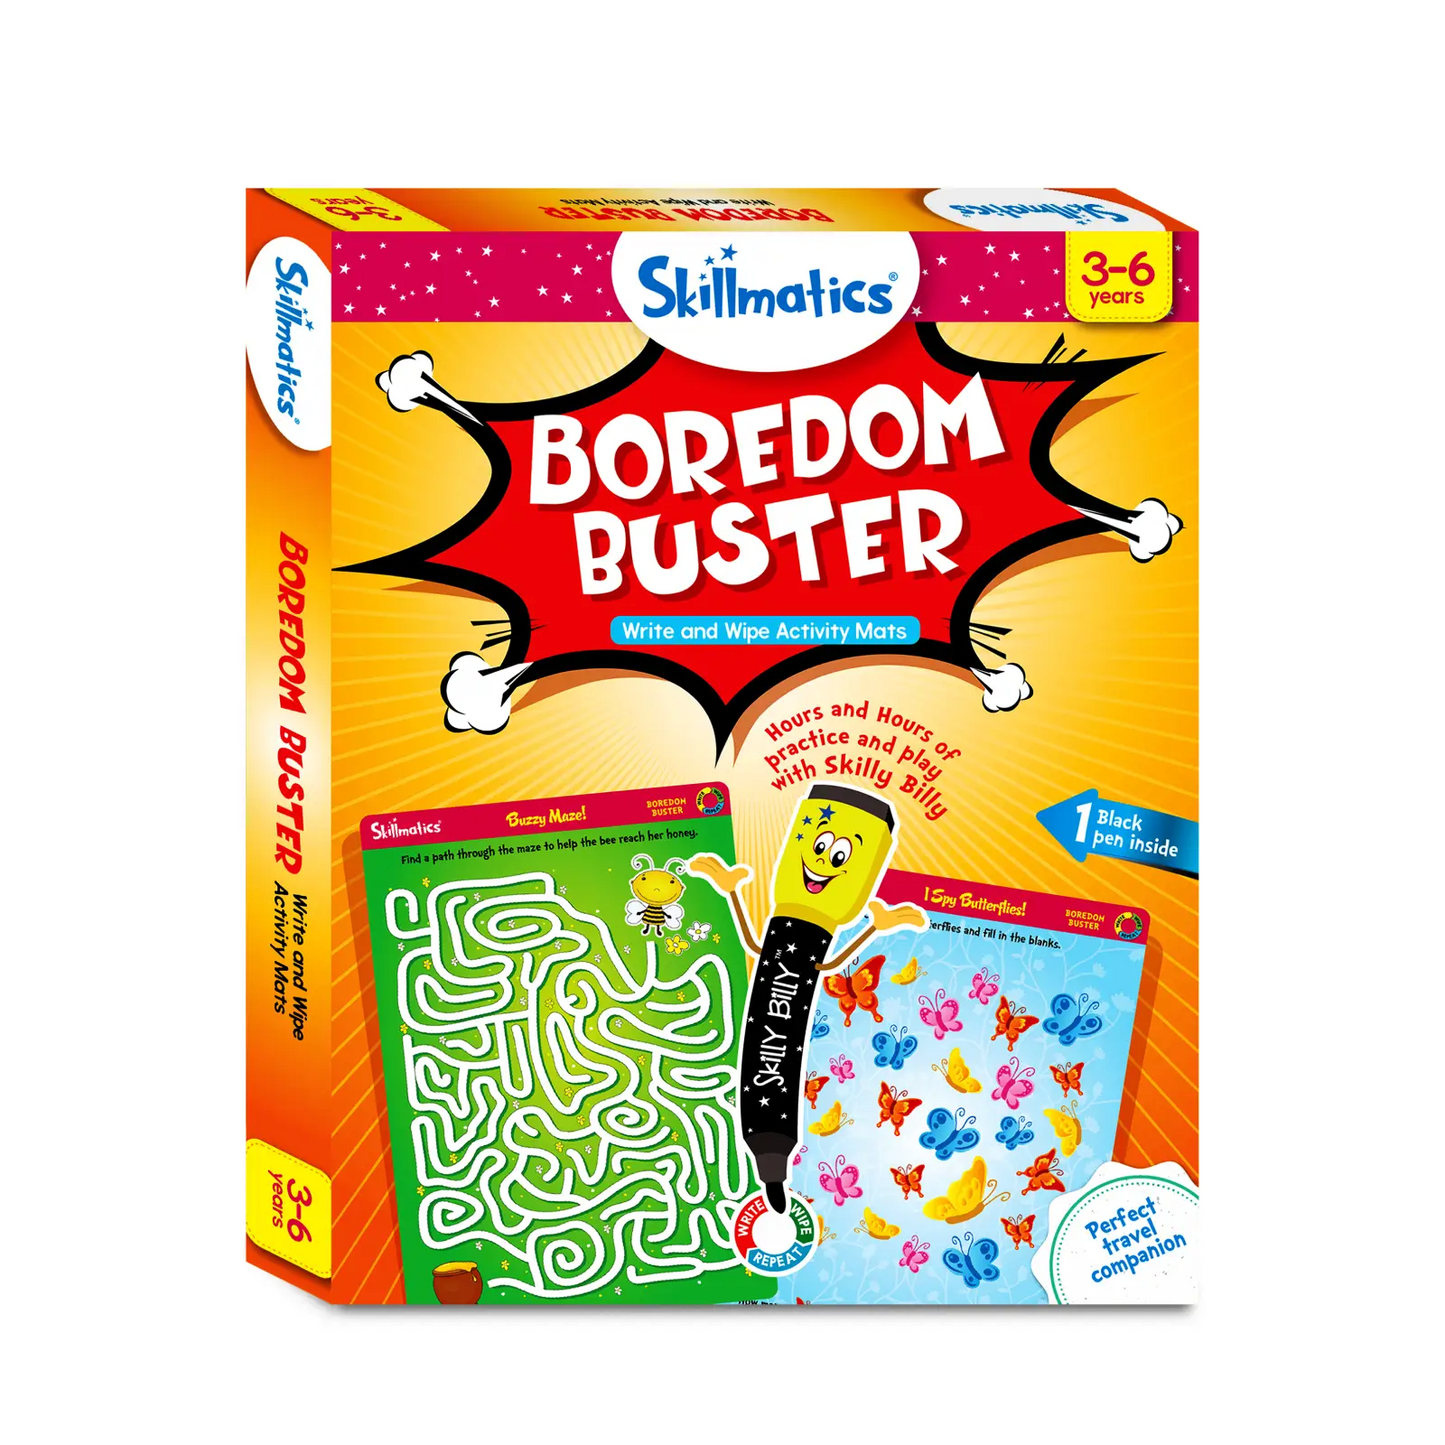 Boredom Buster | Reusable Activity Mats (ages 3-6)